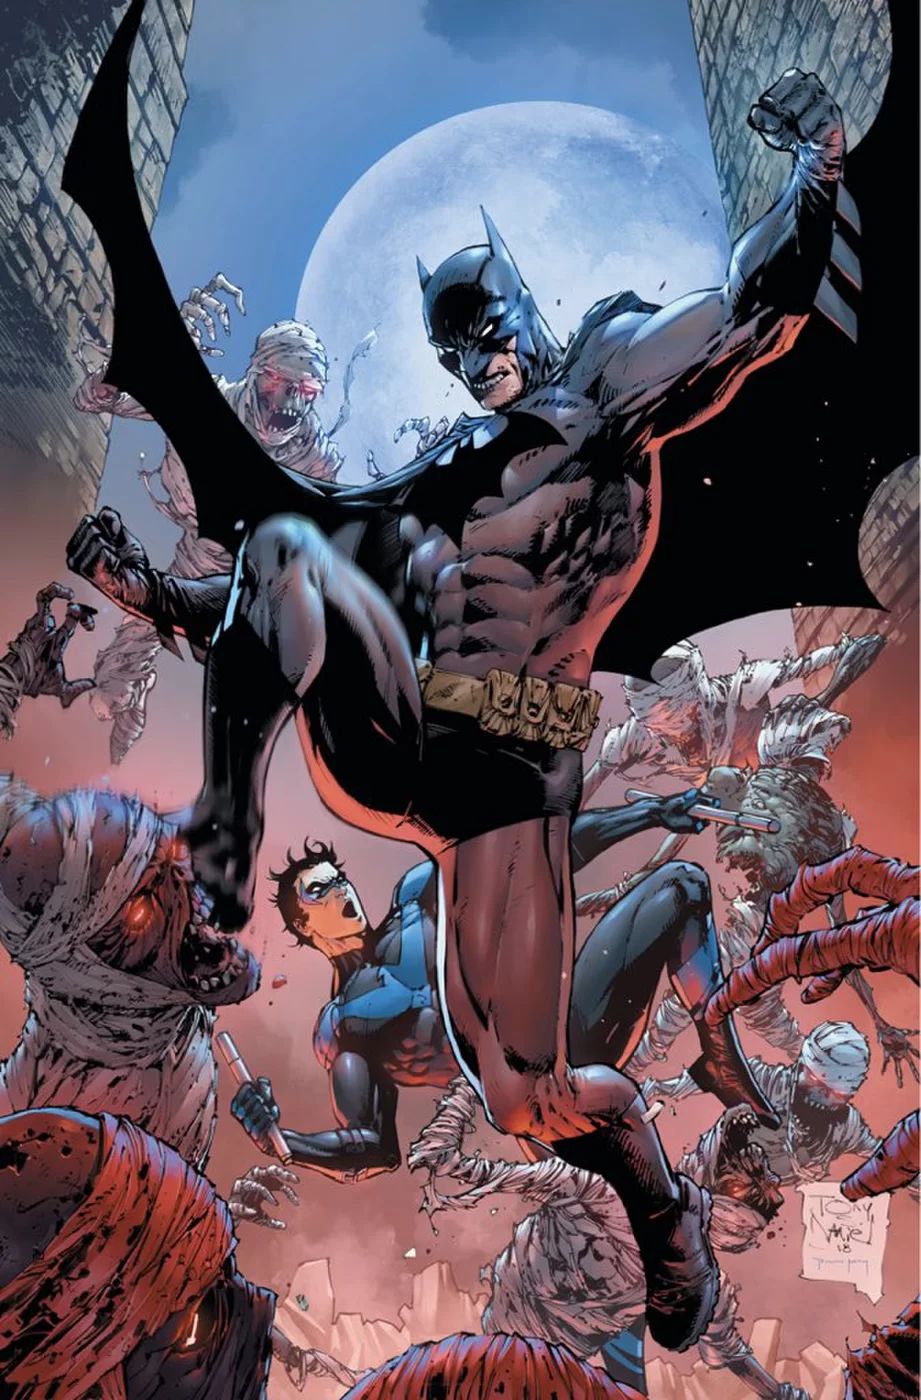 Do you think Batman has outgrown the underwear over tights, or do